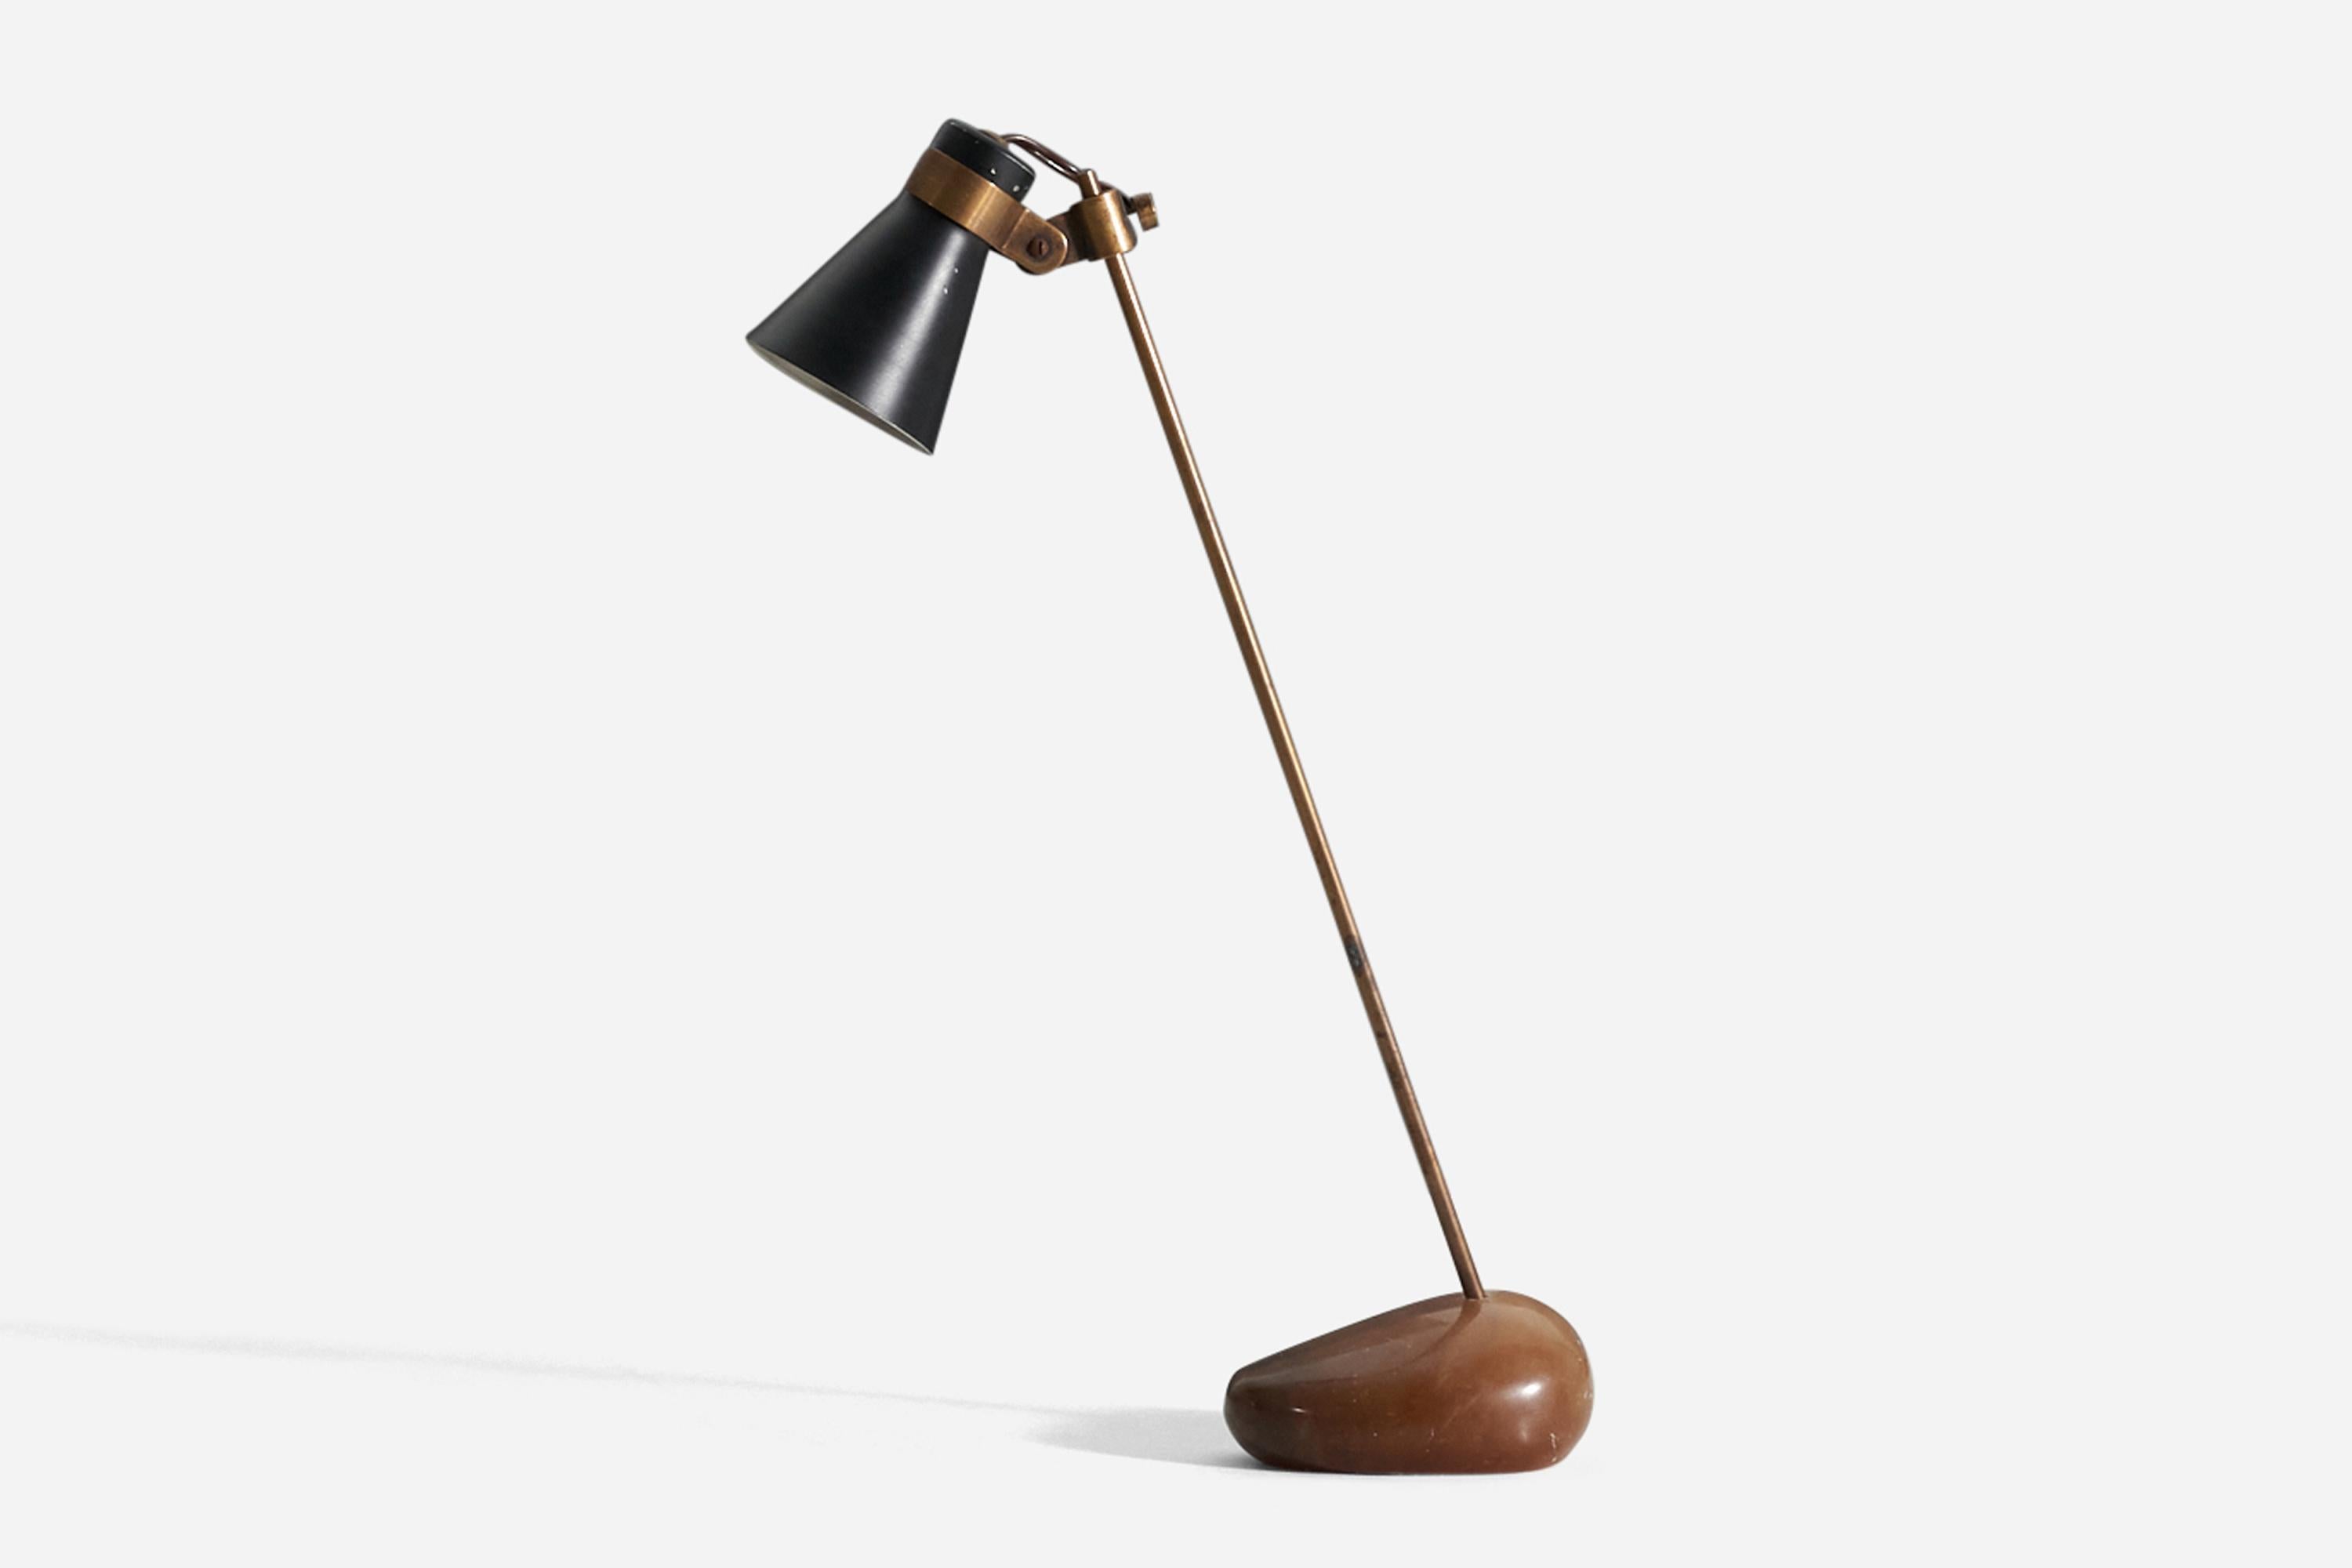 A rare and early ‘Sasso’ table lamp designed by Luigi Caccia Dominioni and produced by Azucena, Milan, Italy, c. 1948. The lamp is comprised of a brass stem standing in a polished Iranian river stone base, with an anodized aluminum shade painted